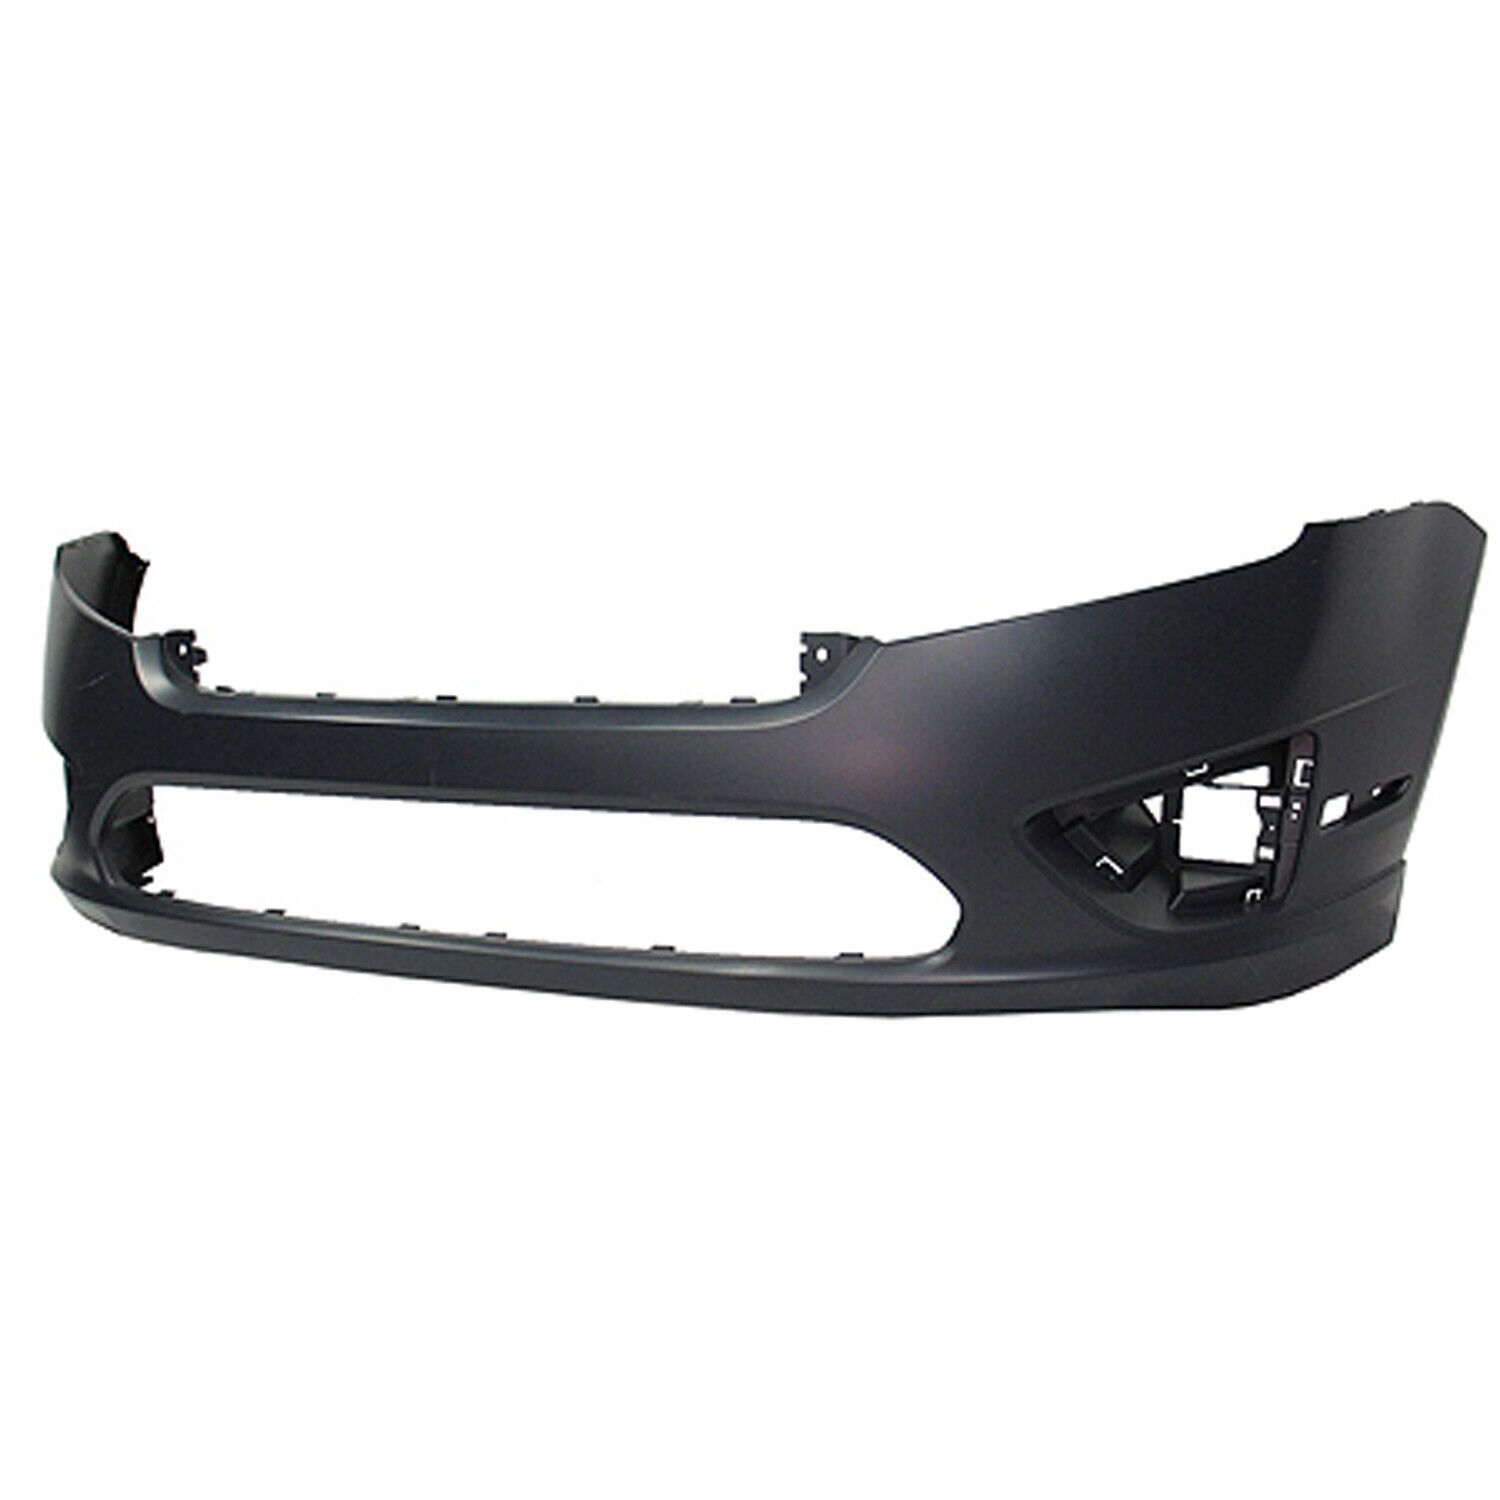 NEW PRIMED FRONT BUMPER COVER FOR 10-12 FORD FUSION FO1000650